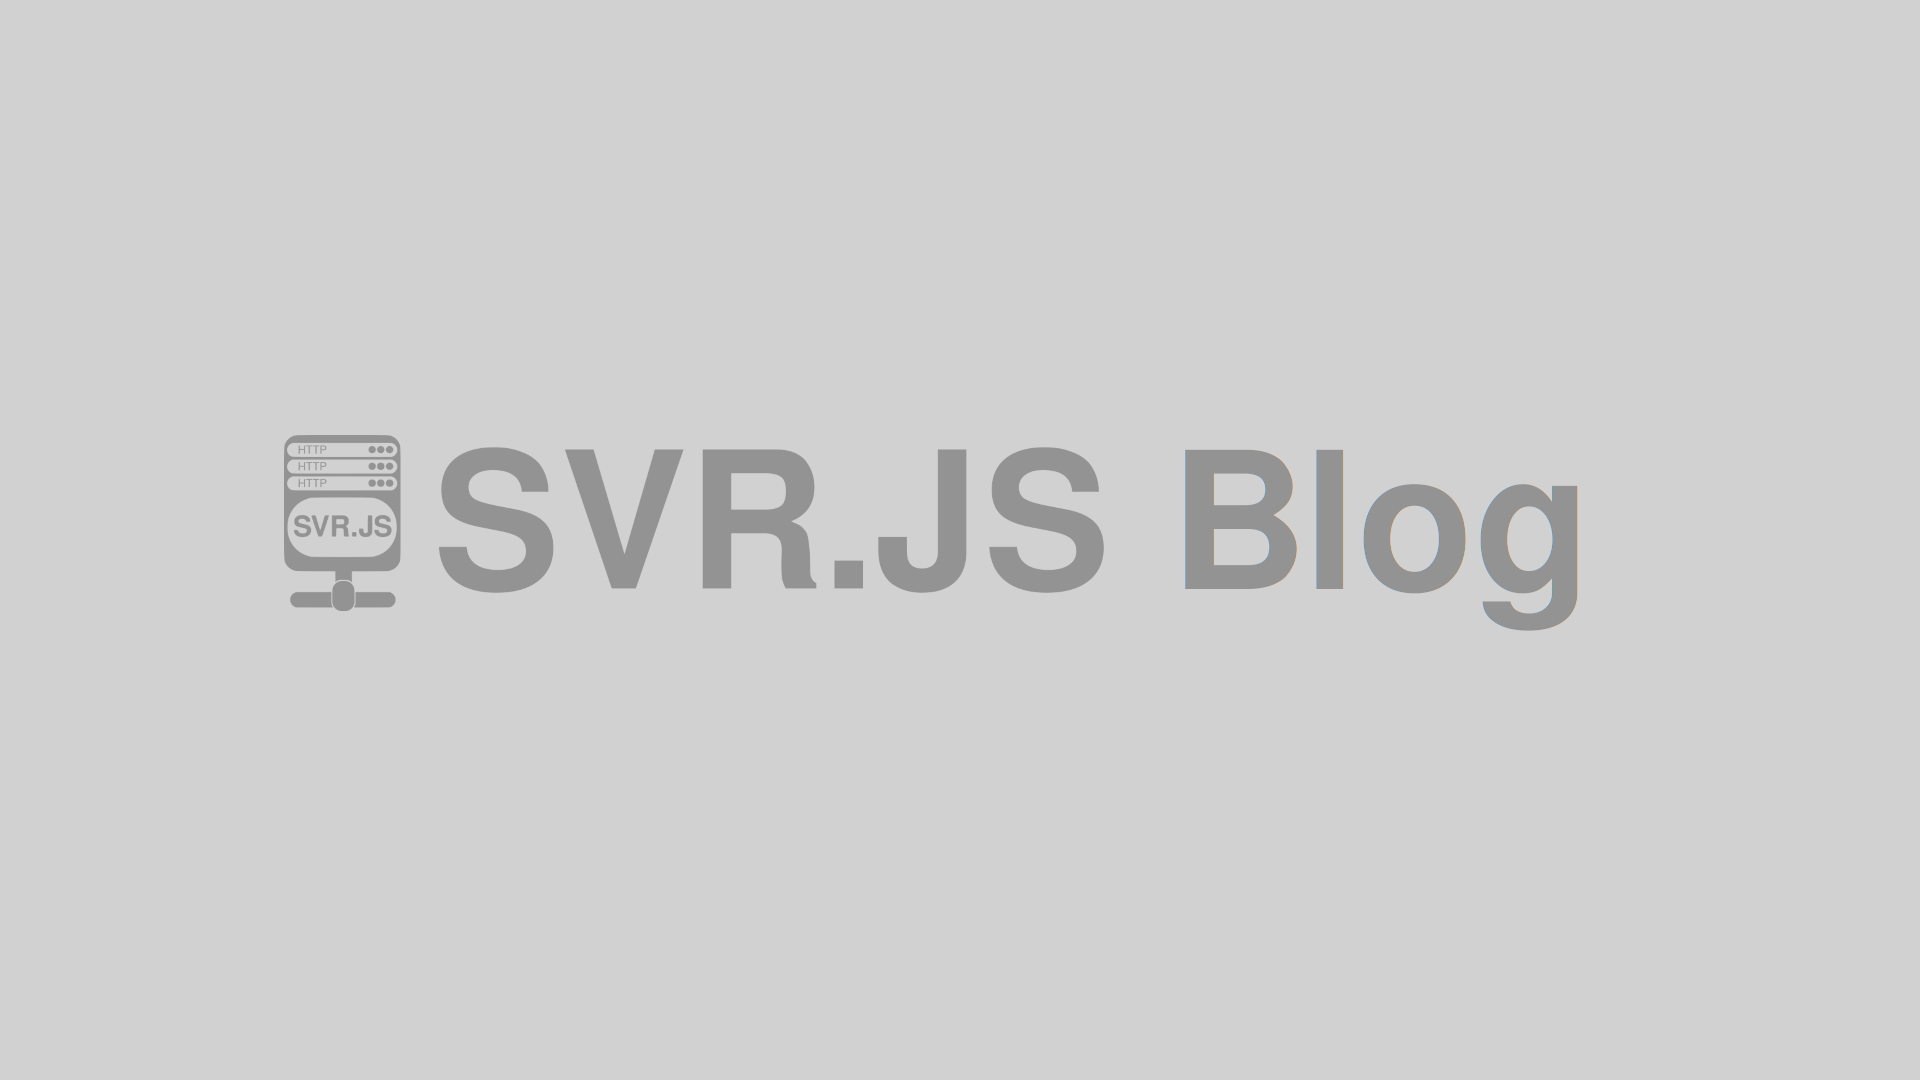 Attention! Upgrade SVR.JS to 3.13.0 or 3.4.41 LTS and newer!